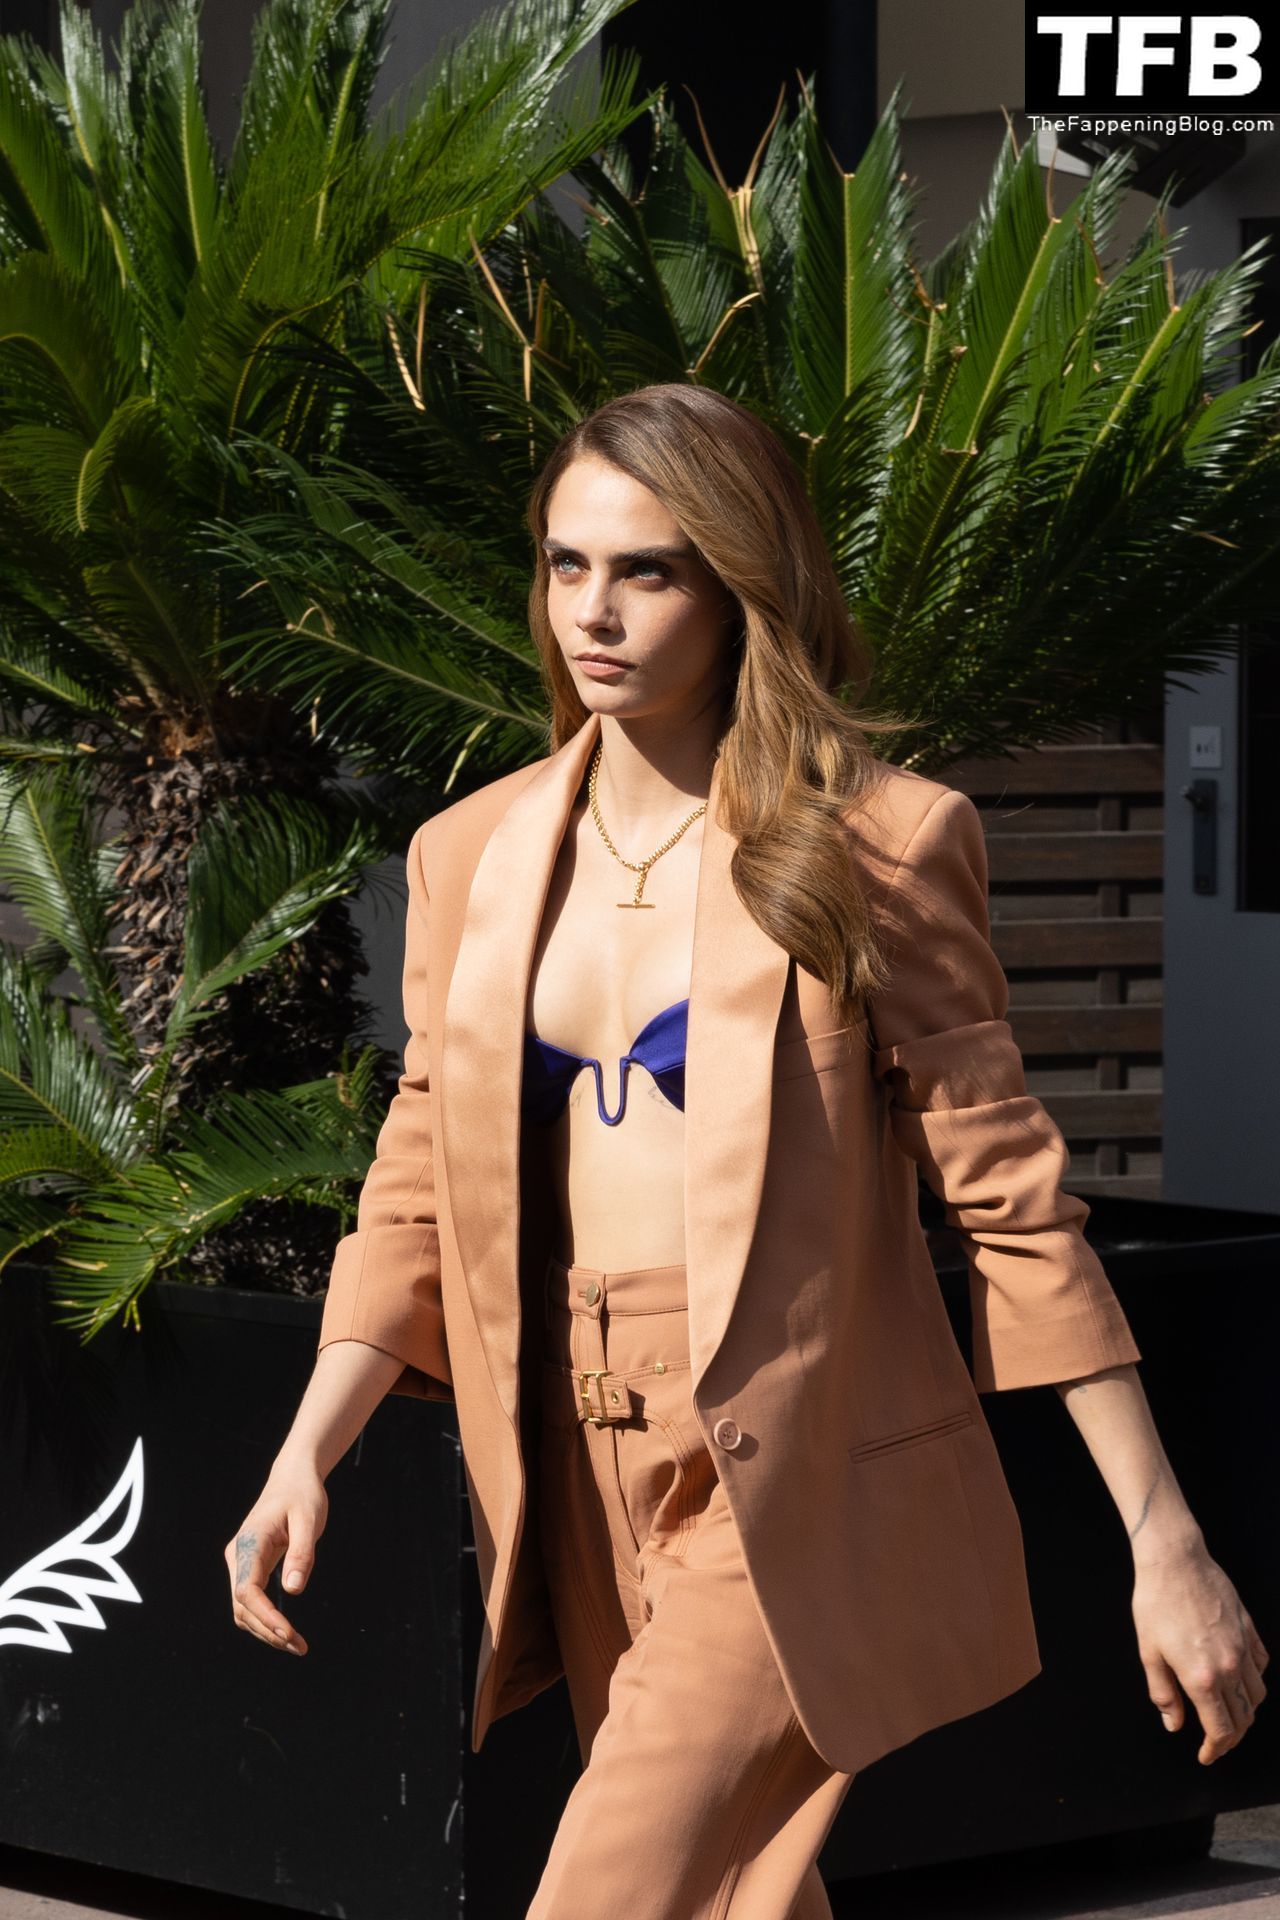 Cara-Delevingne-Sexy-The-Fappening-Blog-43-1.jpg